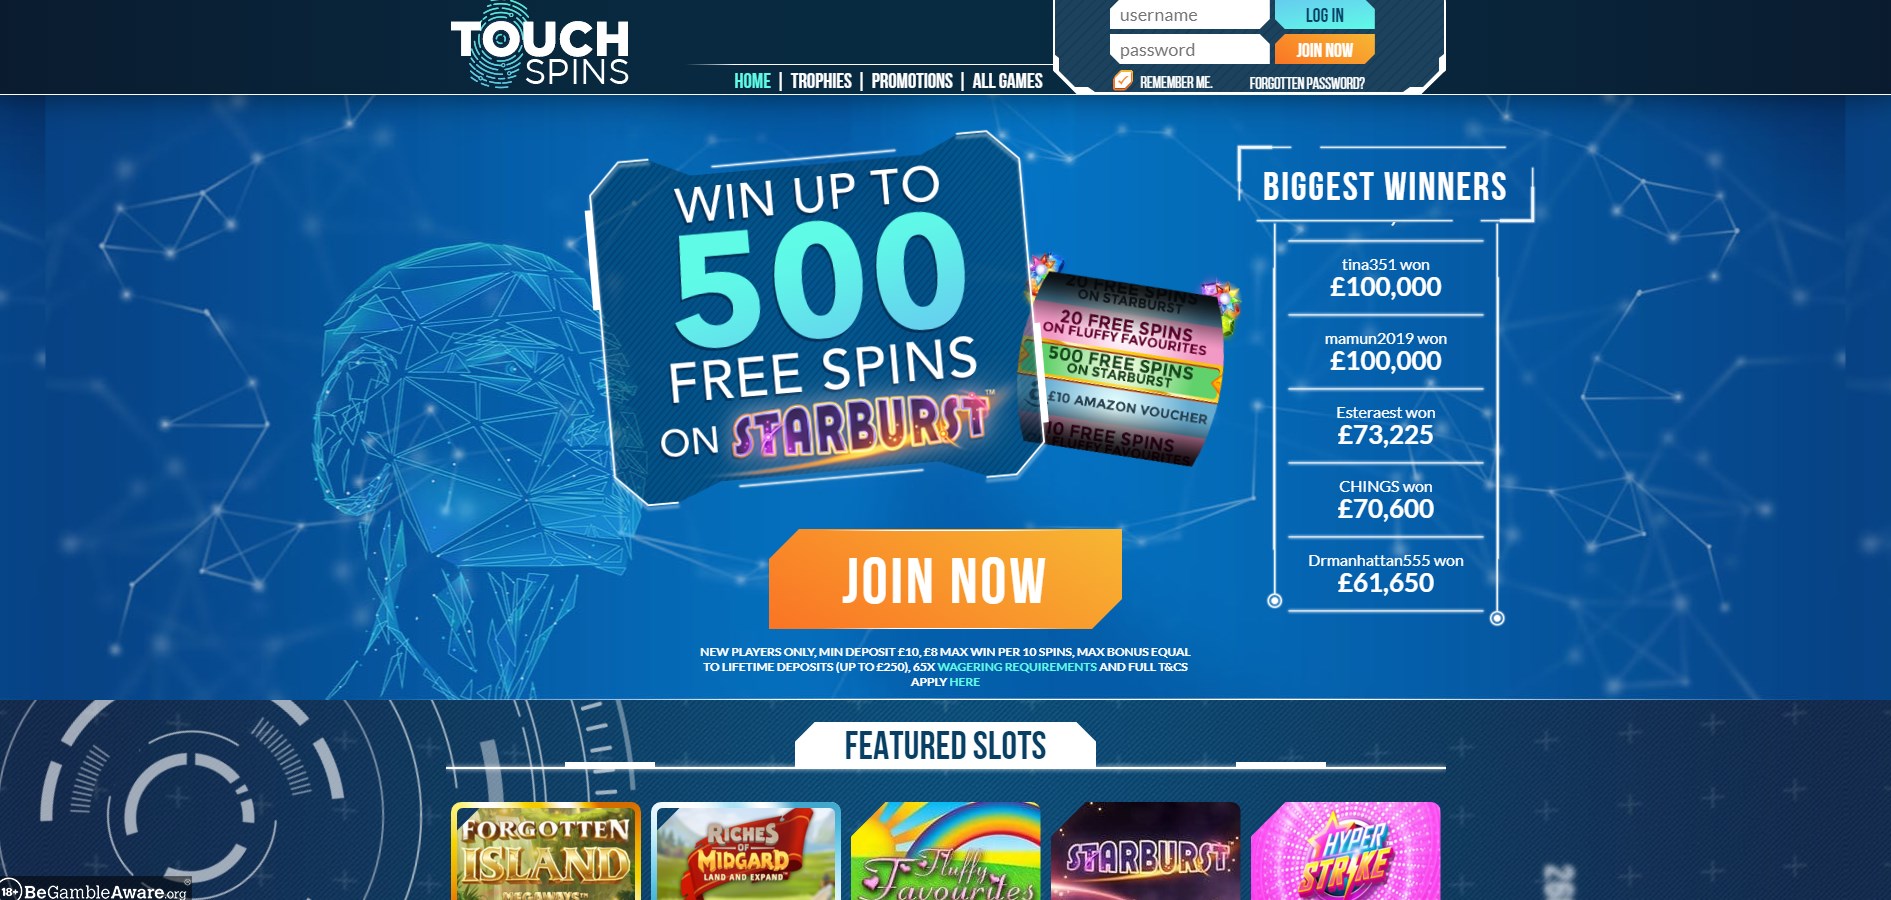 Touch Spins Casino Review